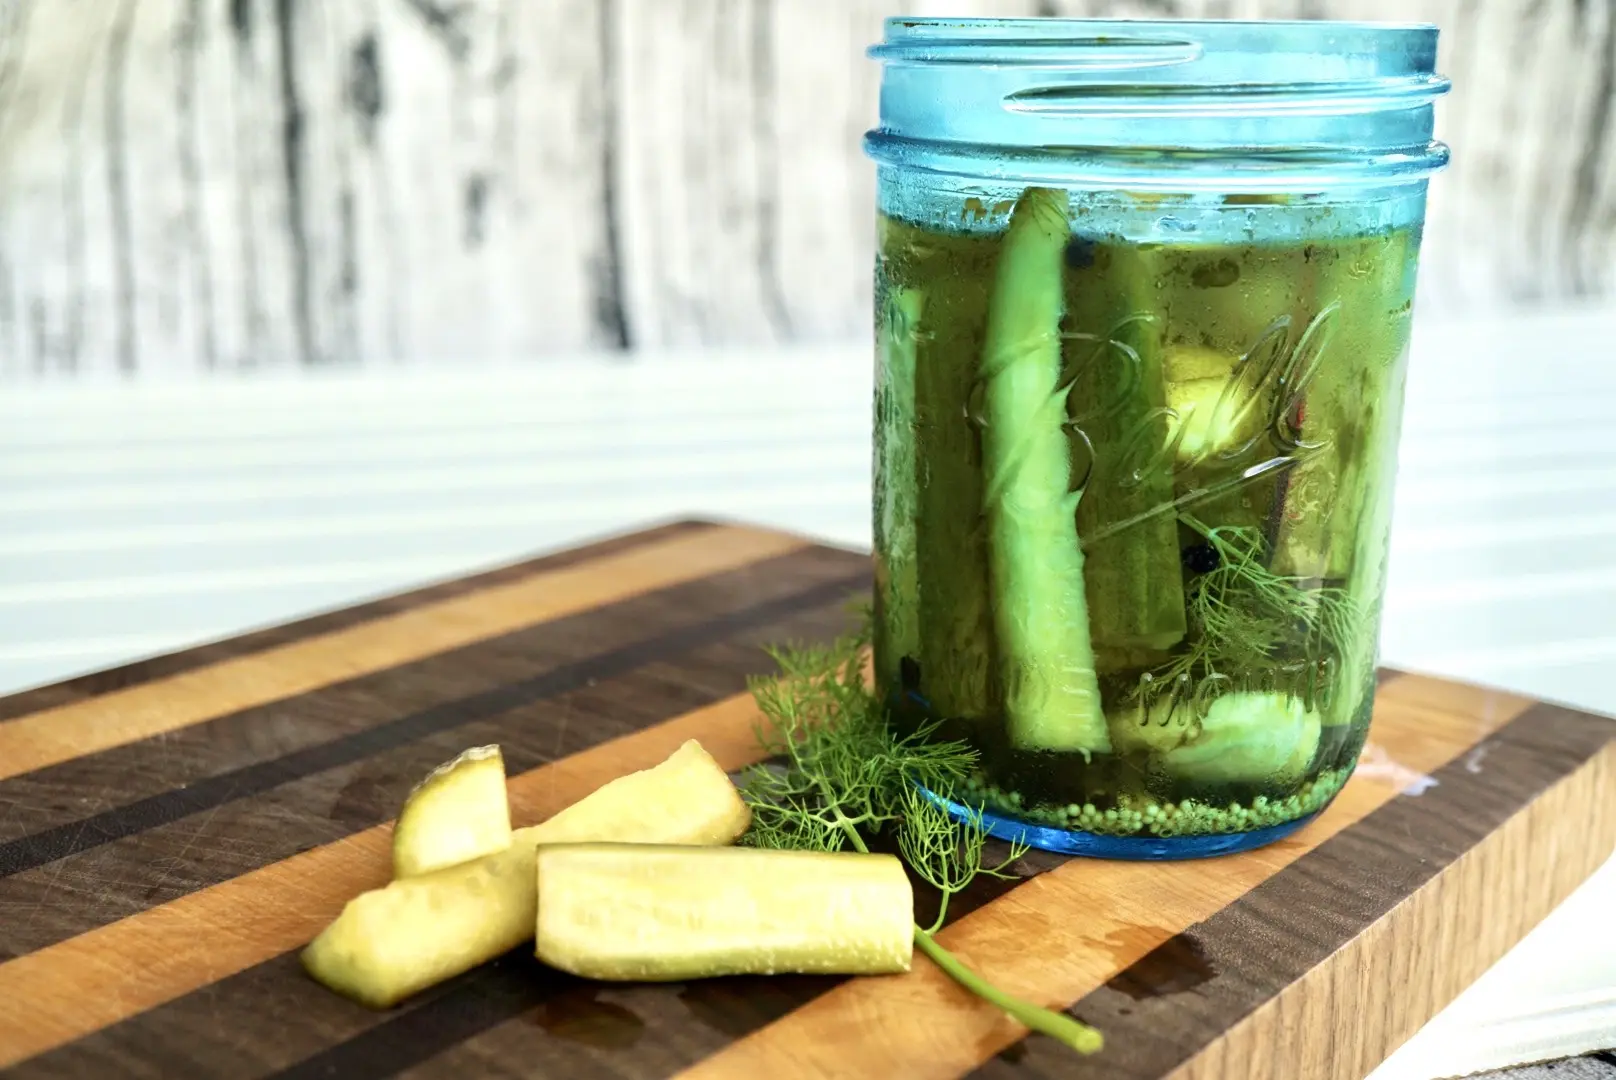 smoked pickles - Can you smoke dill pickles